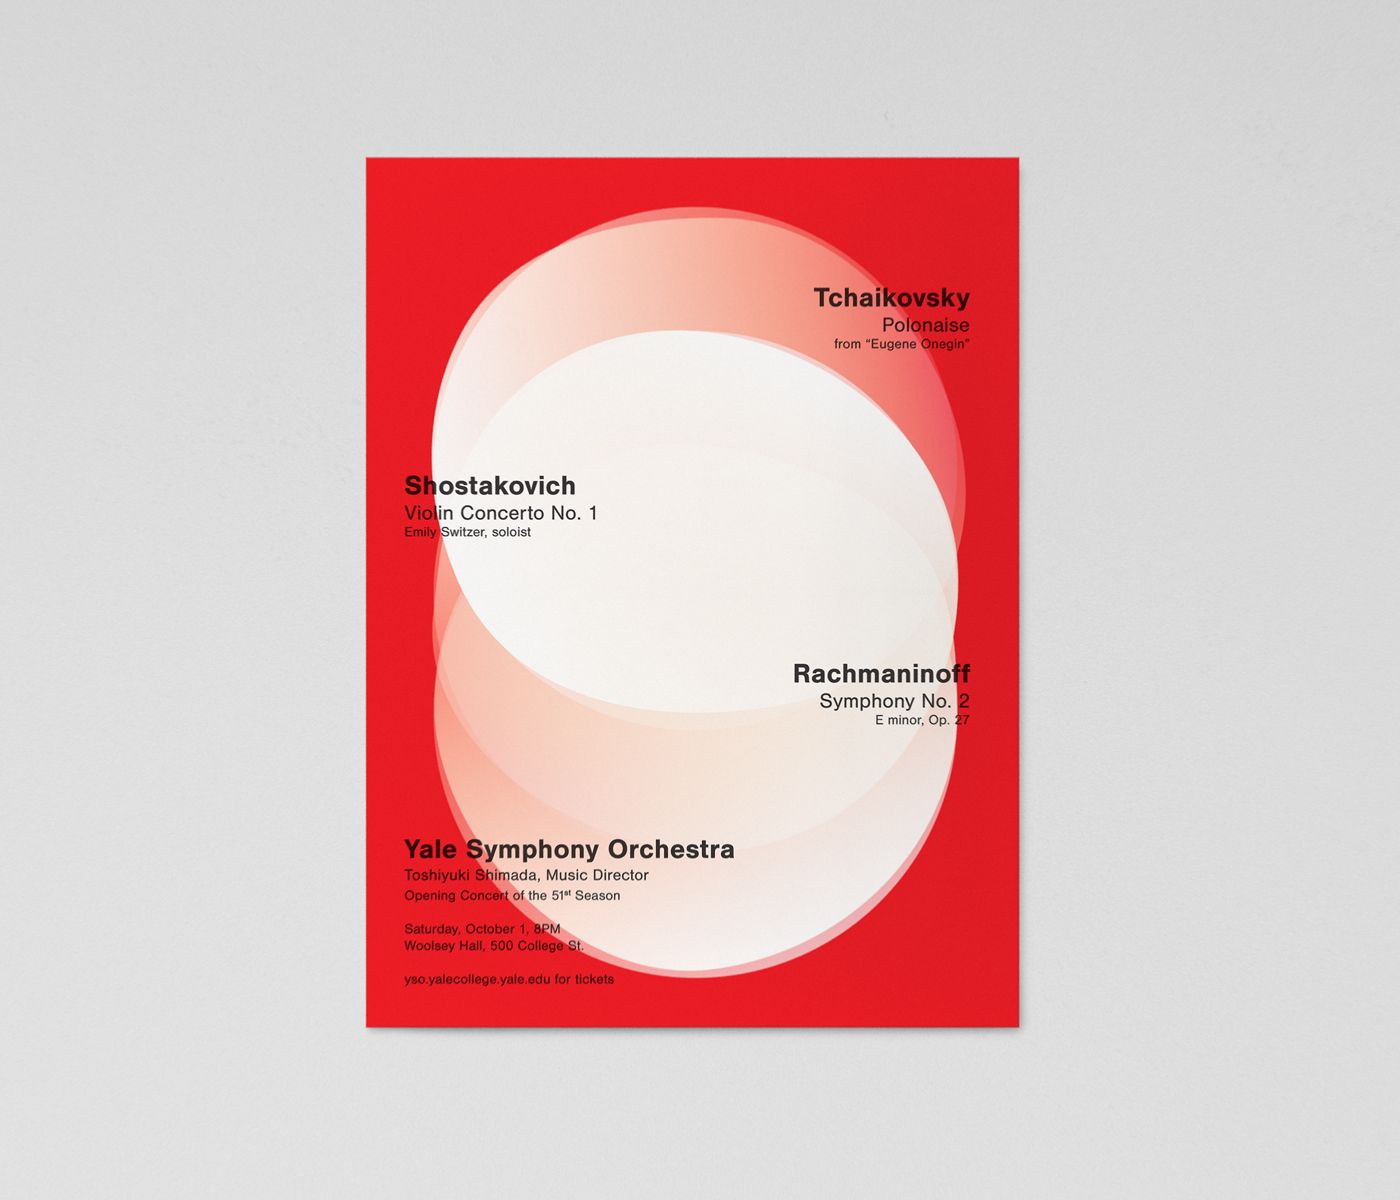 Minimalist Swiss poster design for The Yale Symphony Orchestra’s Opening Concert of the 51st Season. Circular white designs overlap and float on a red background. Black text describes the concert: Tchaikovsky, Shostakovich, and Rachmaninoff